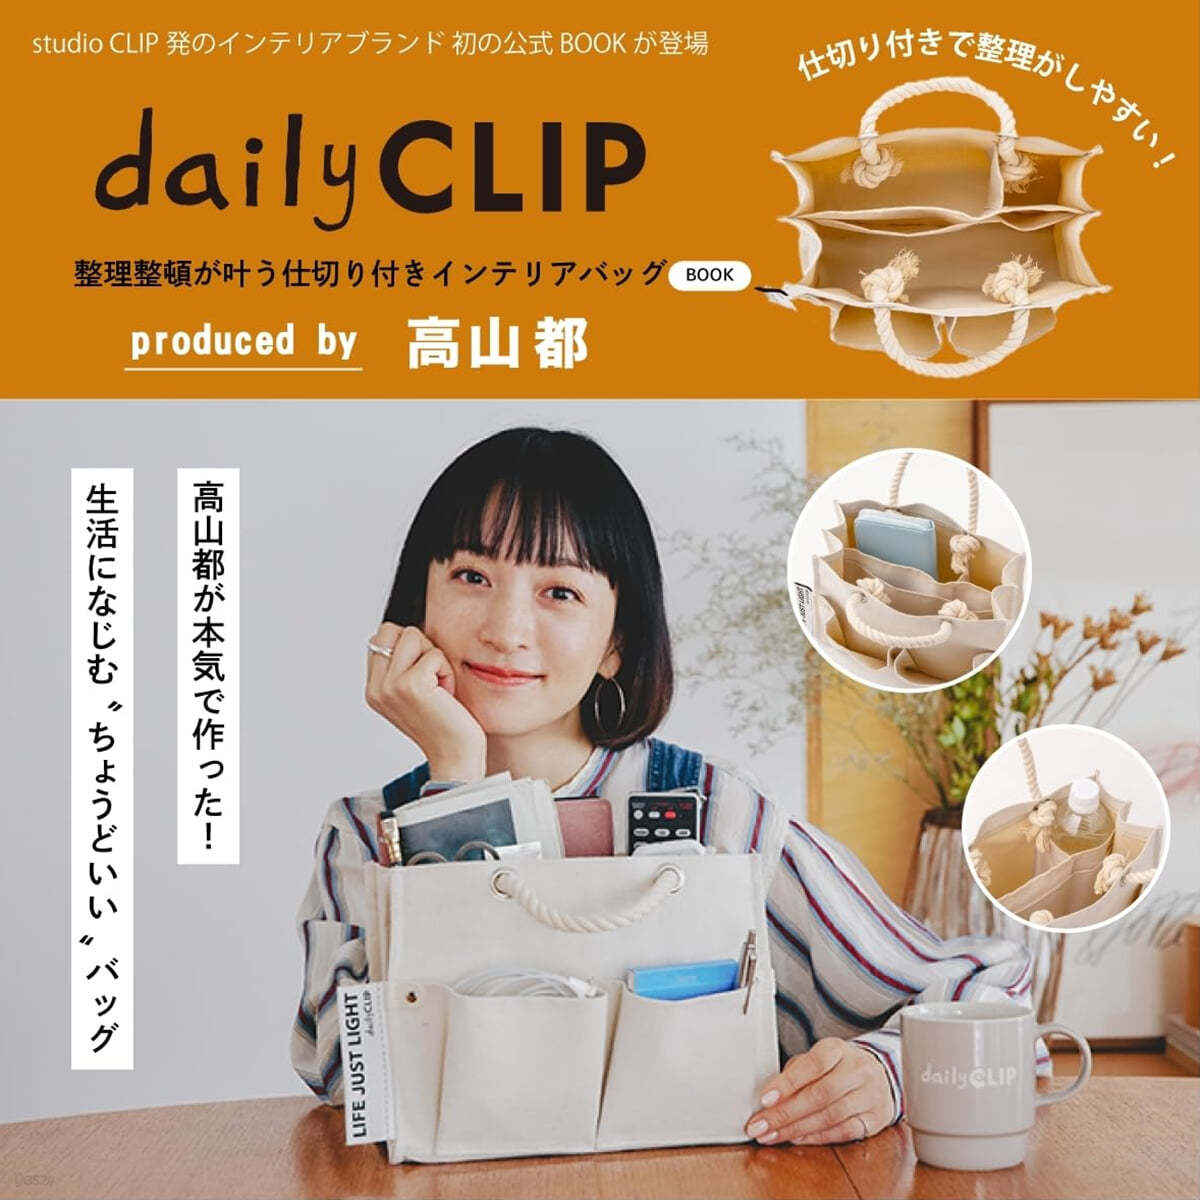 daily CLIP 整理整頓がかなう仕切り付きインテリアバッグ BOOK produced by 高山都